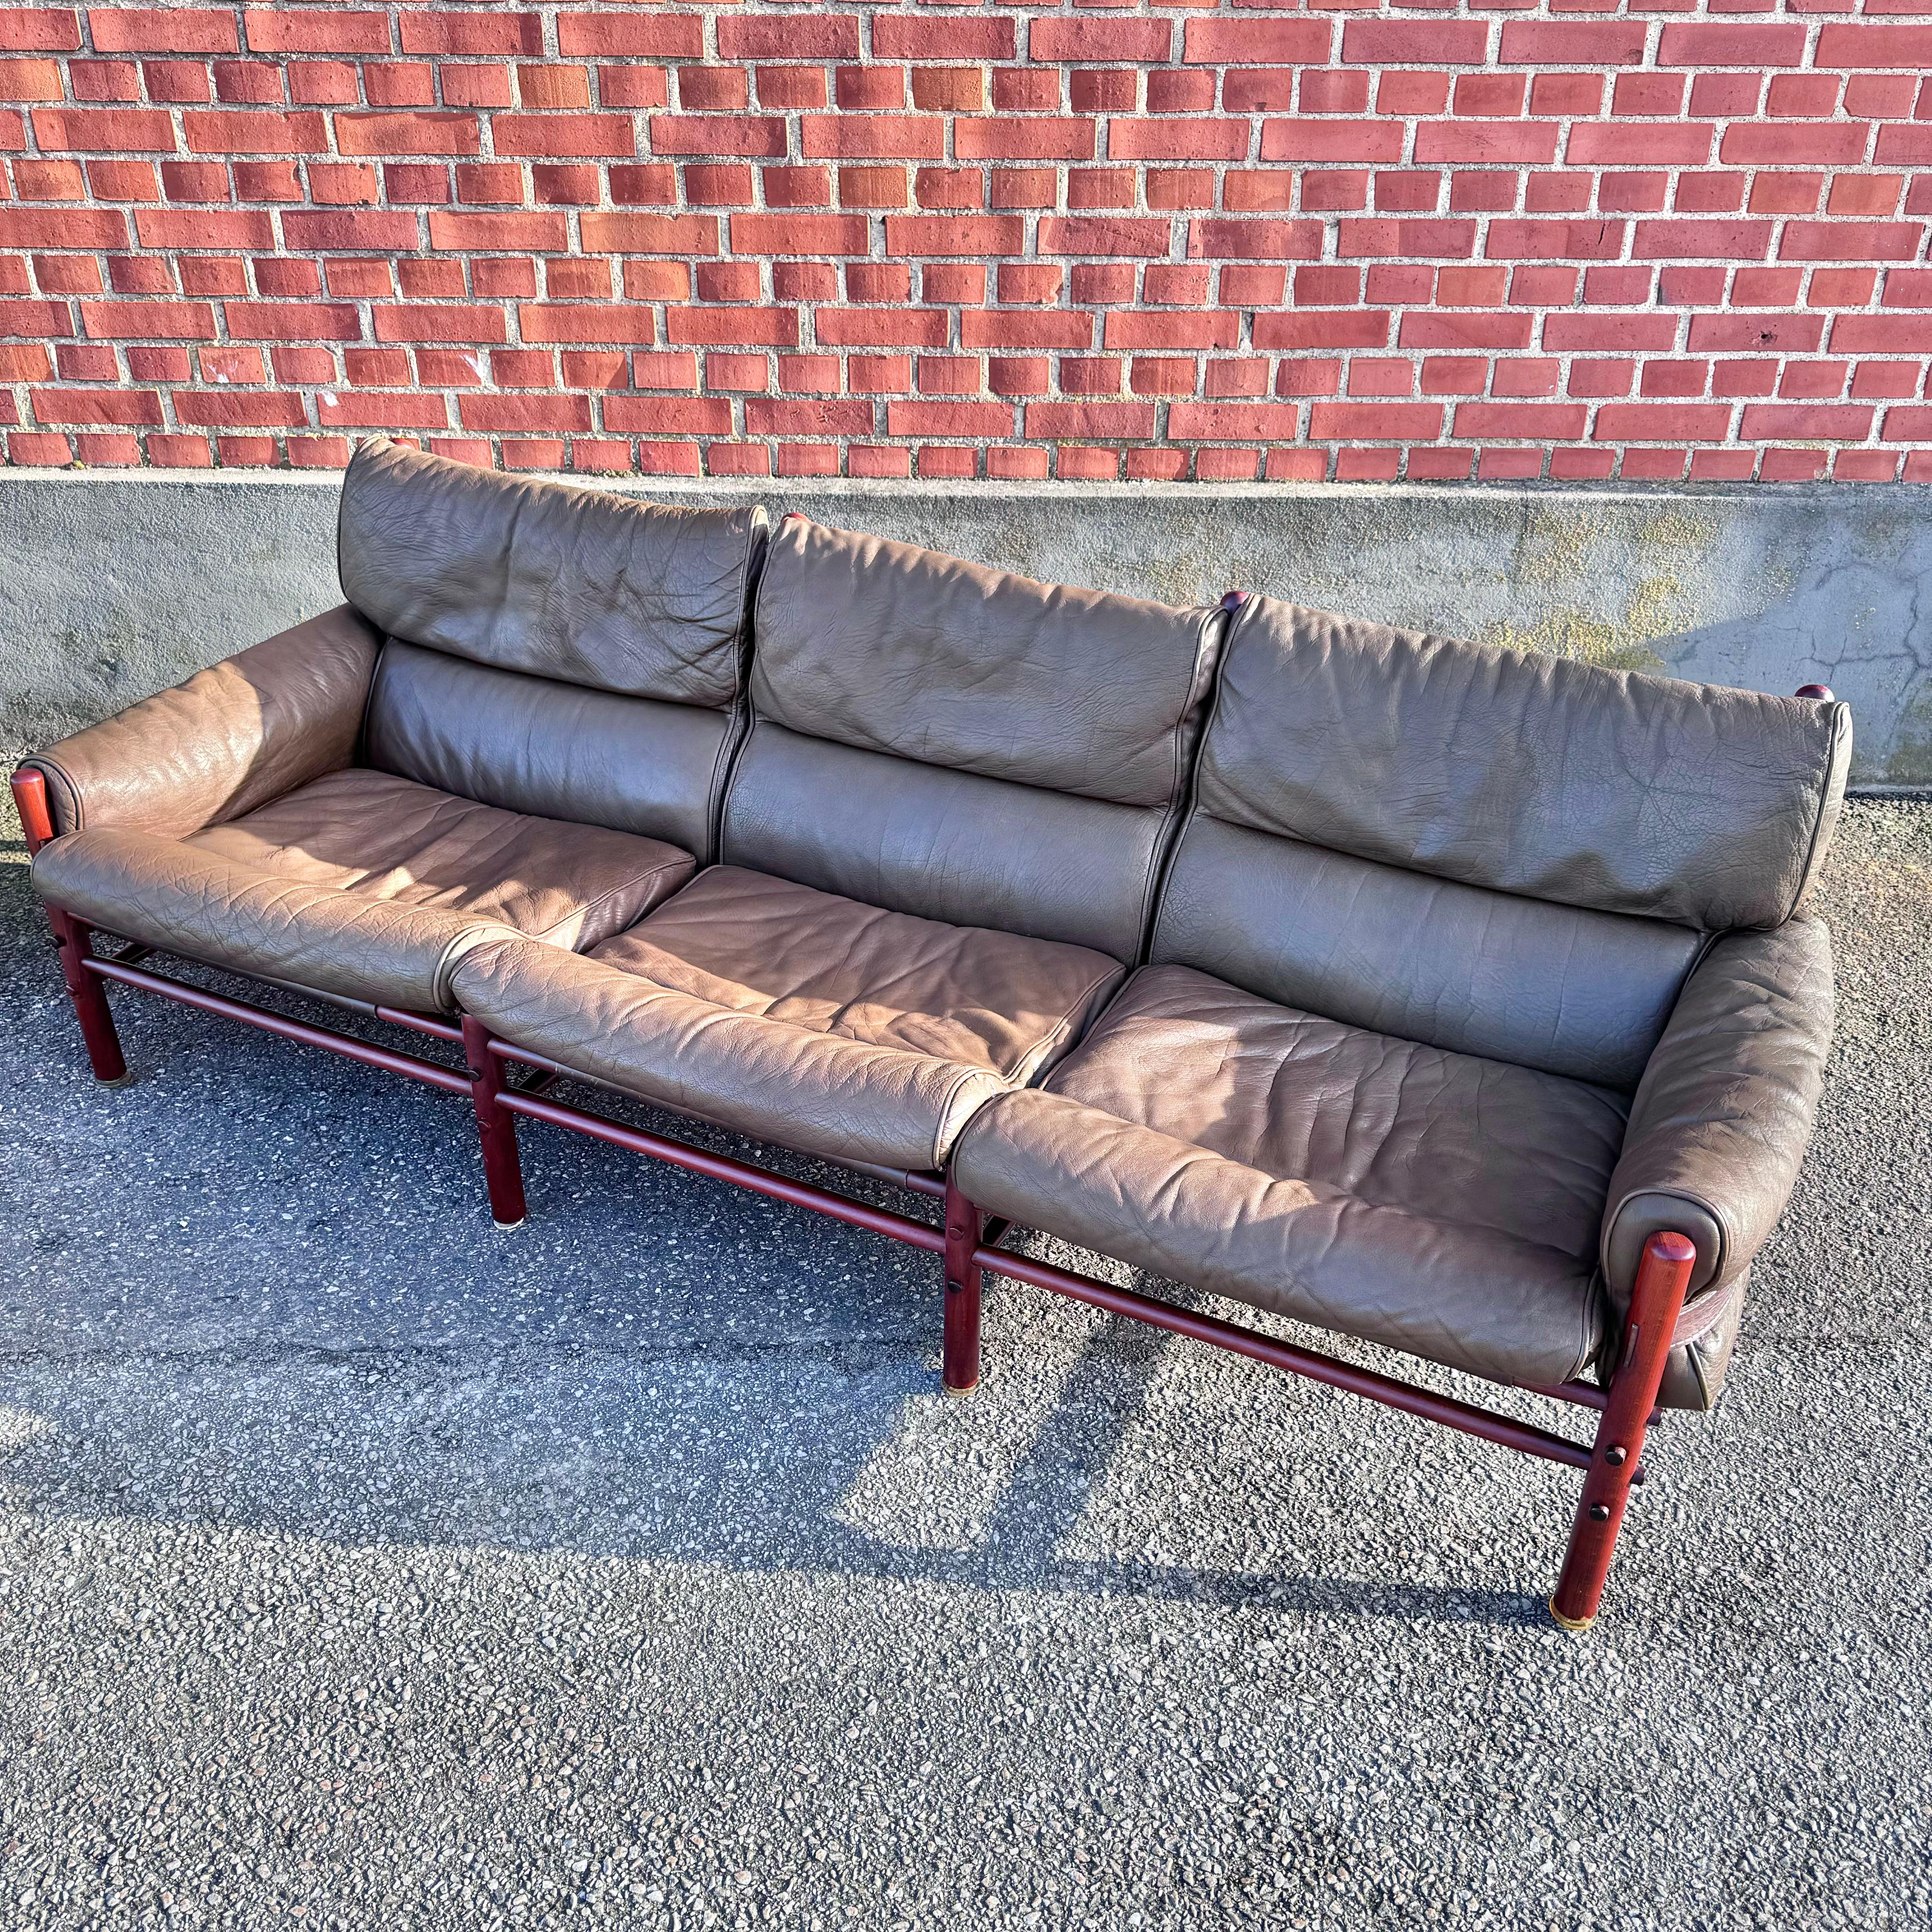 3-seatet ”kontiki” sofa by Arne Norell In Good Condition For Sale In Genarp, SE